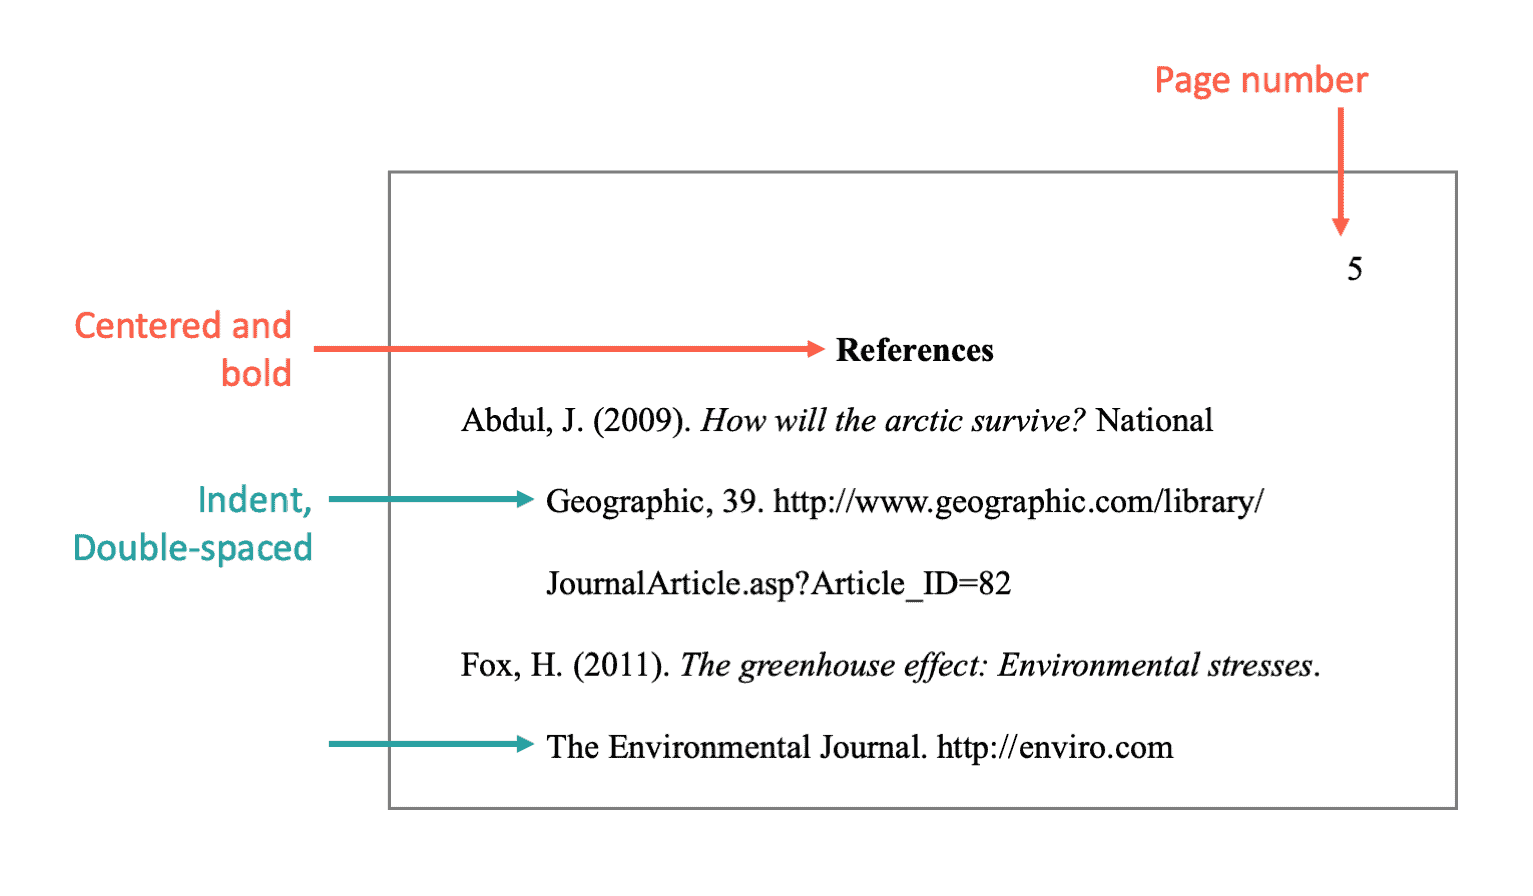 asa annotated bibliography example